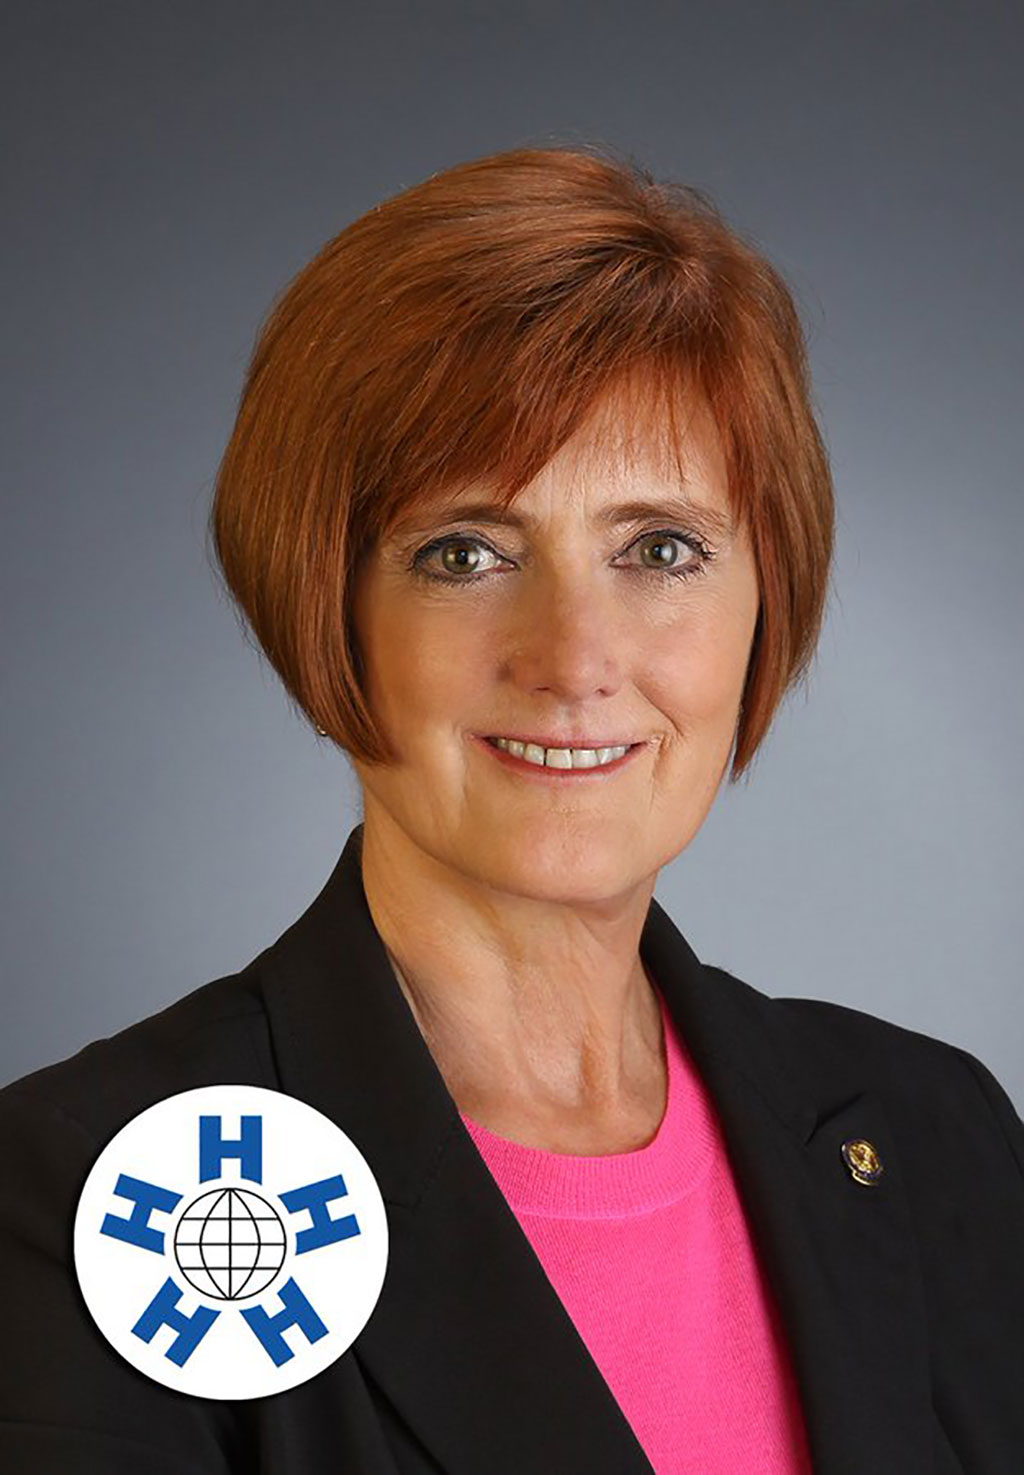 Image: Deborah Bowen Takes Up Position of IHF President for 2021-2023 (Photo courtesy of IHF)